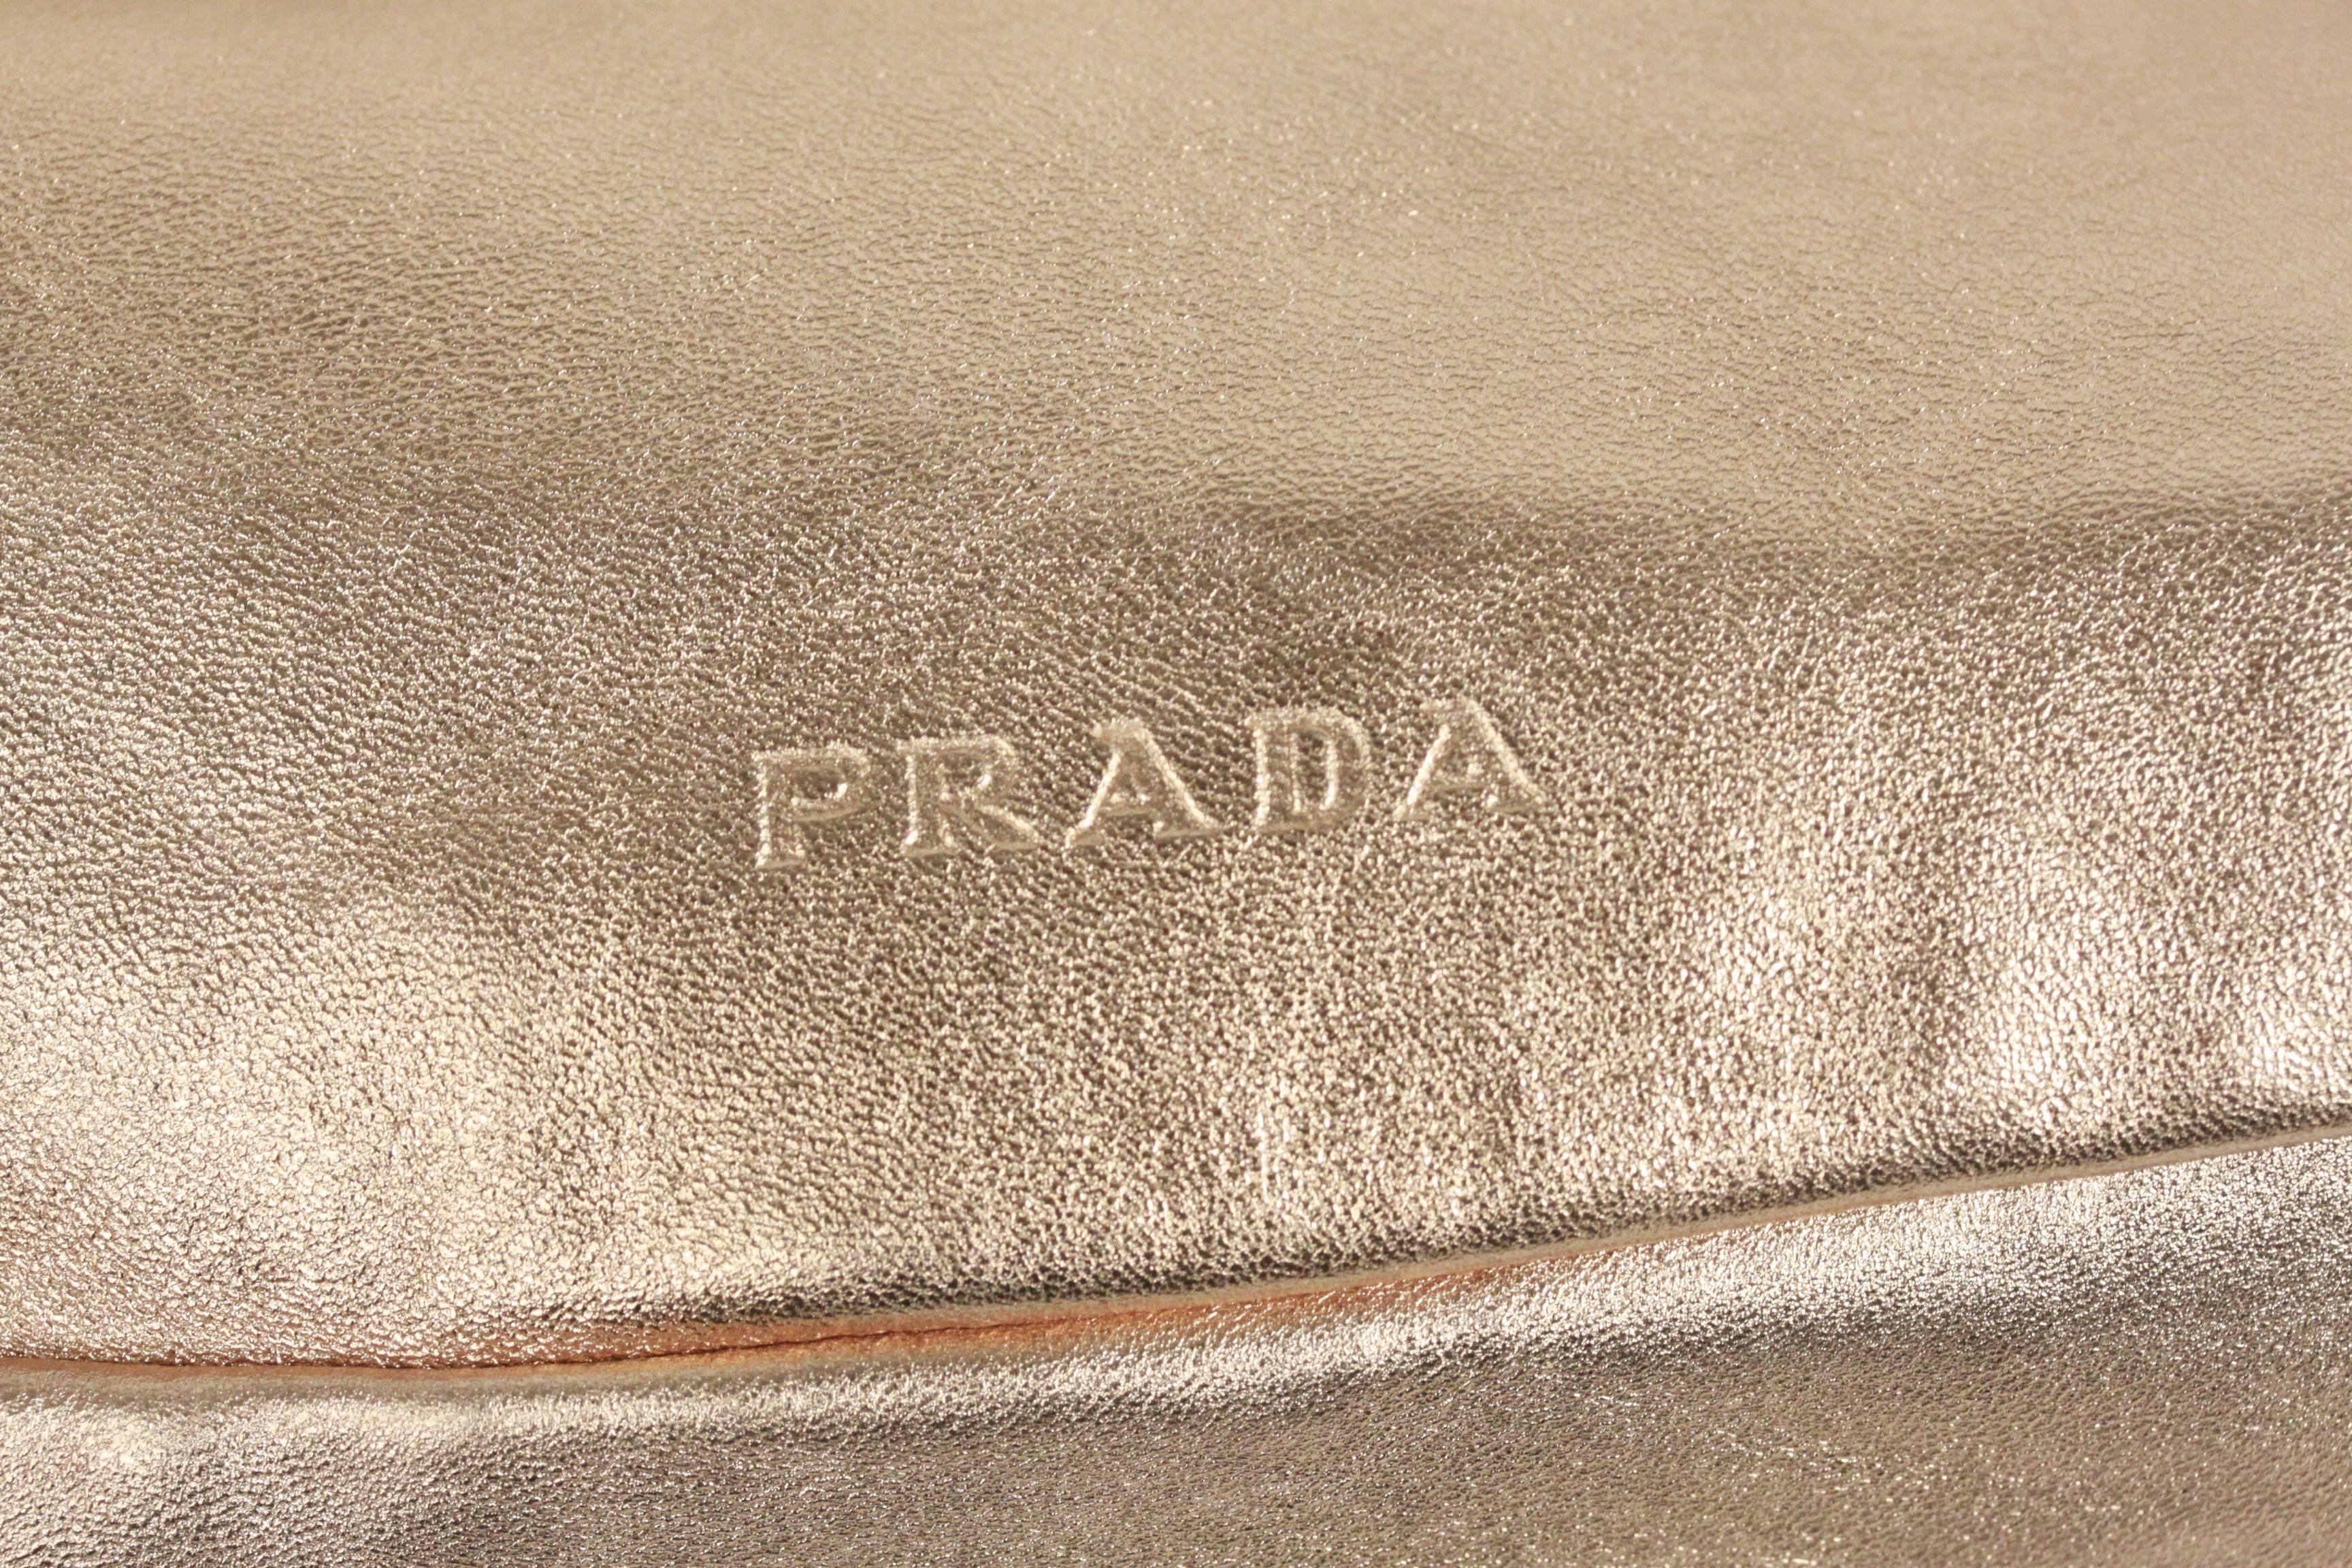 PRADA Gold Tone Leather SHOULDER BAG In Good Condition In Rome, Rome